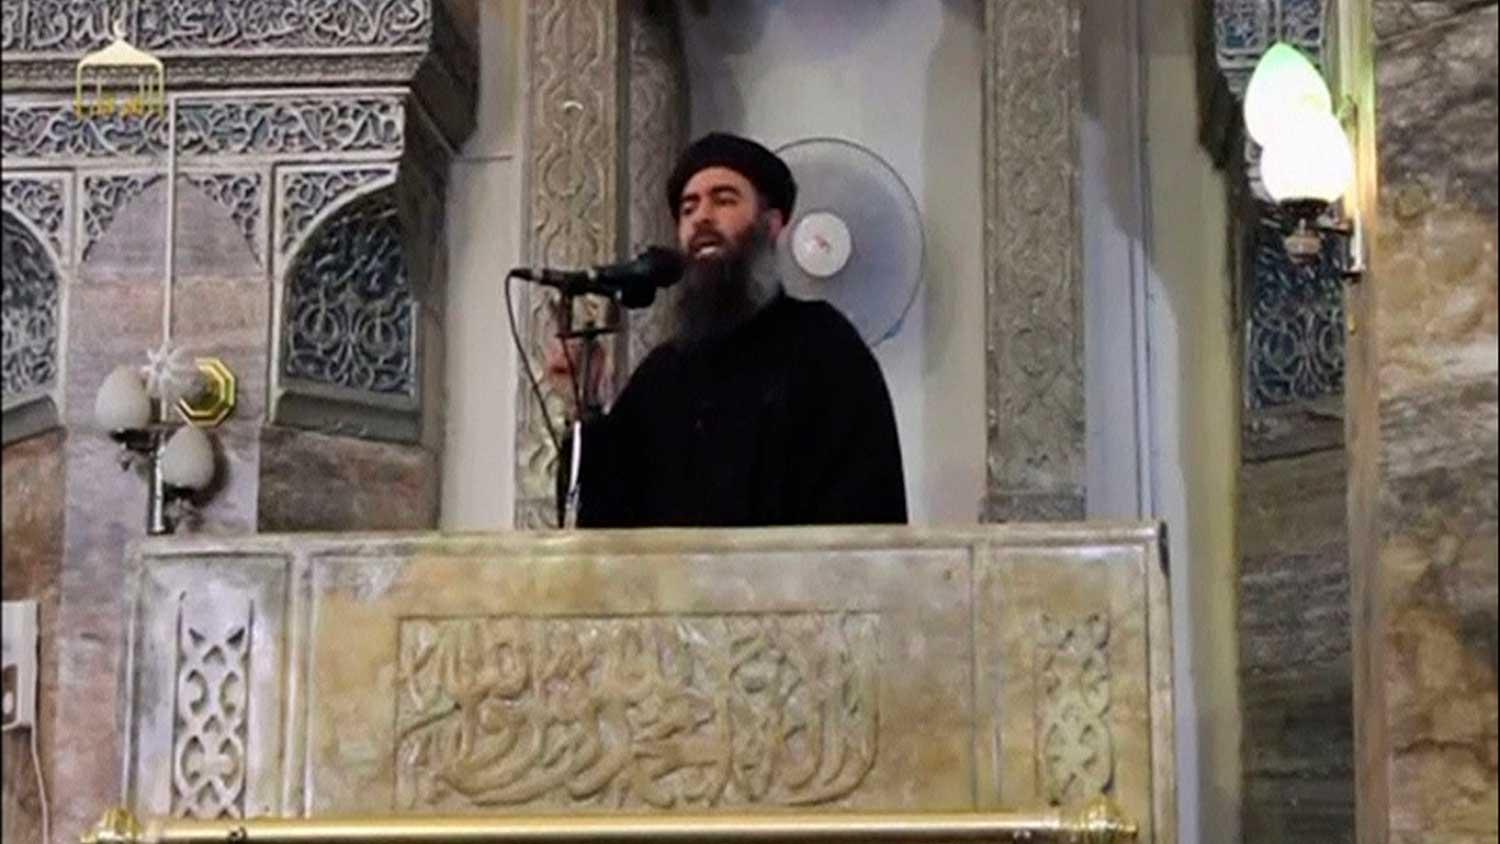 A man speaks at a podium. Behind him is the elaborately decorated wall of an interior of a mosque.